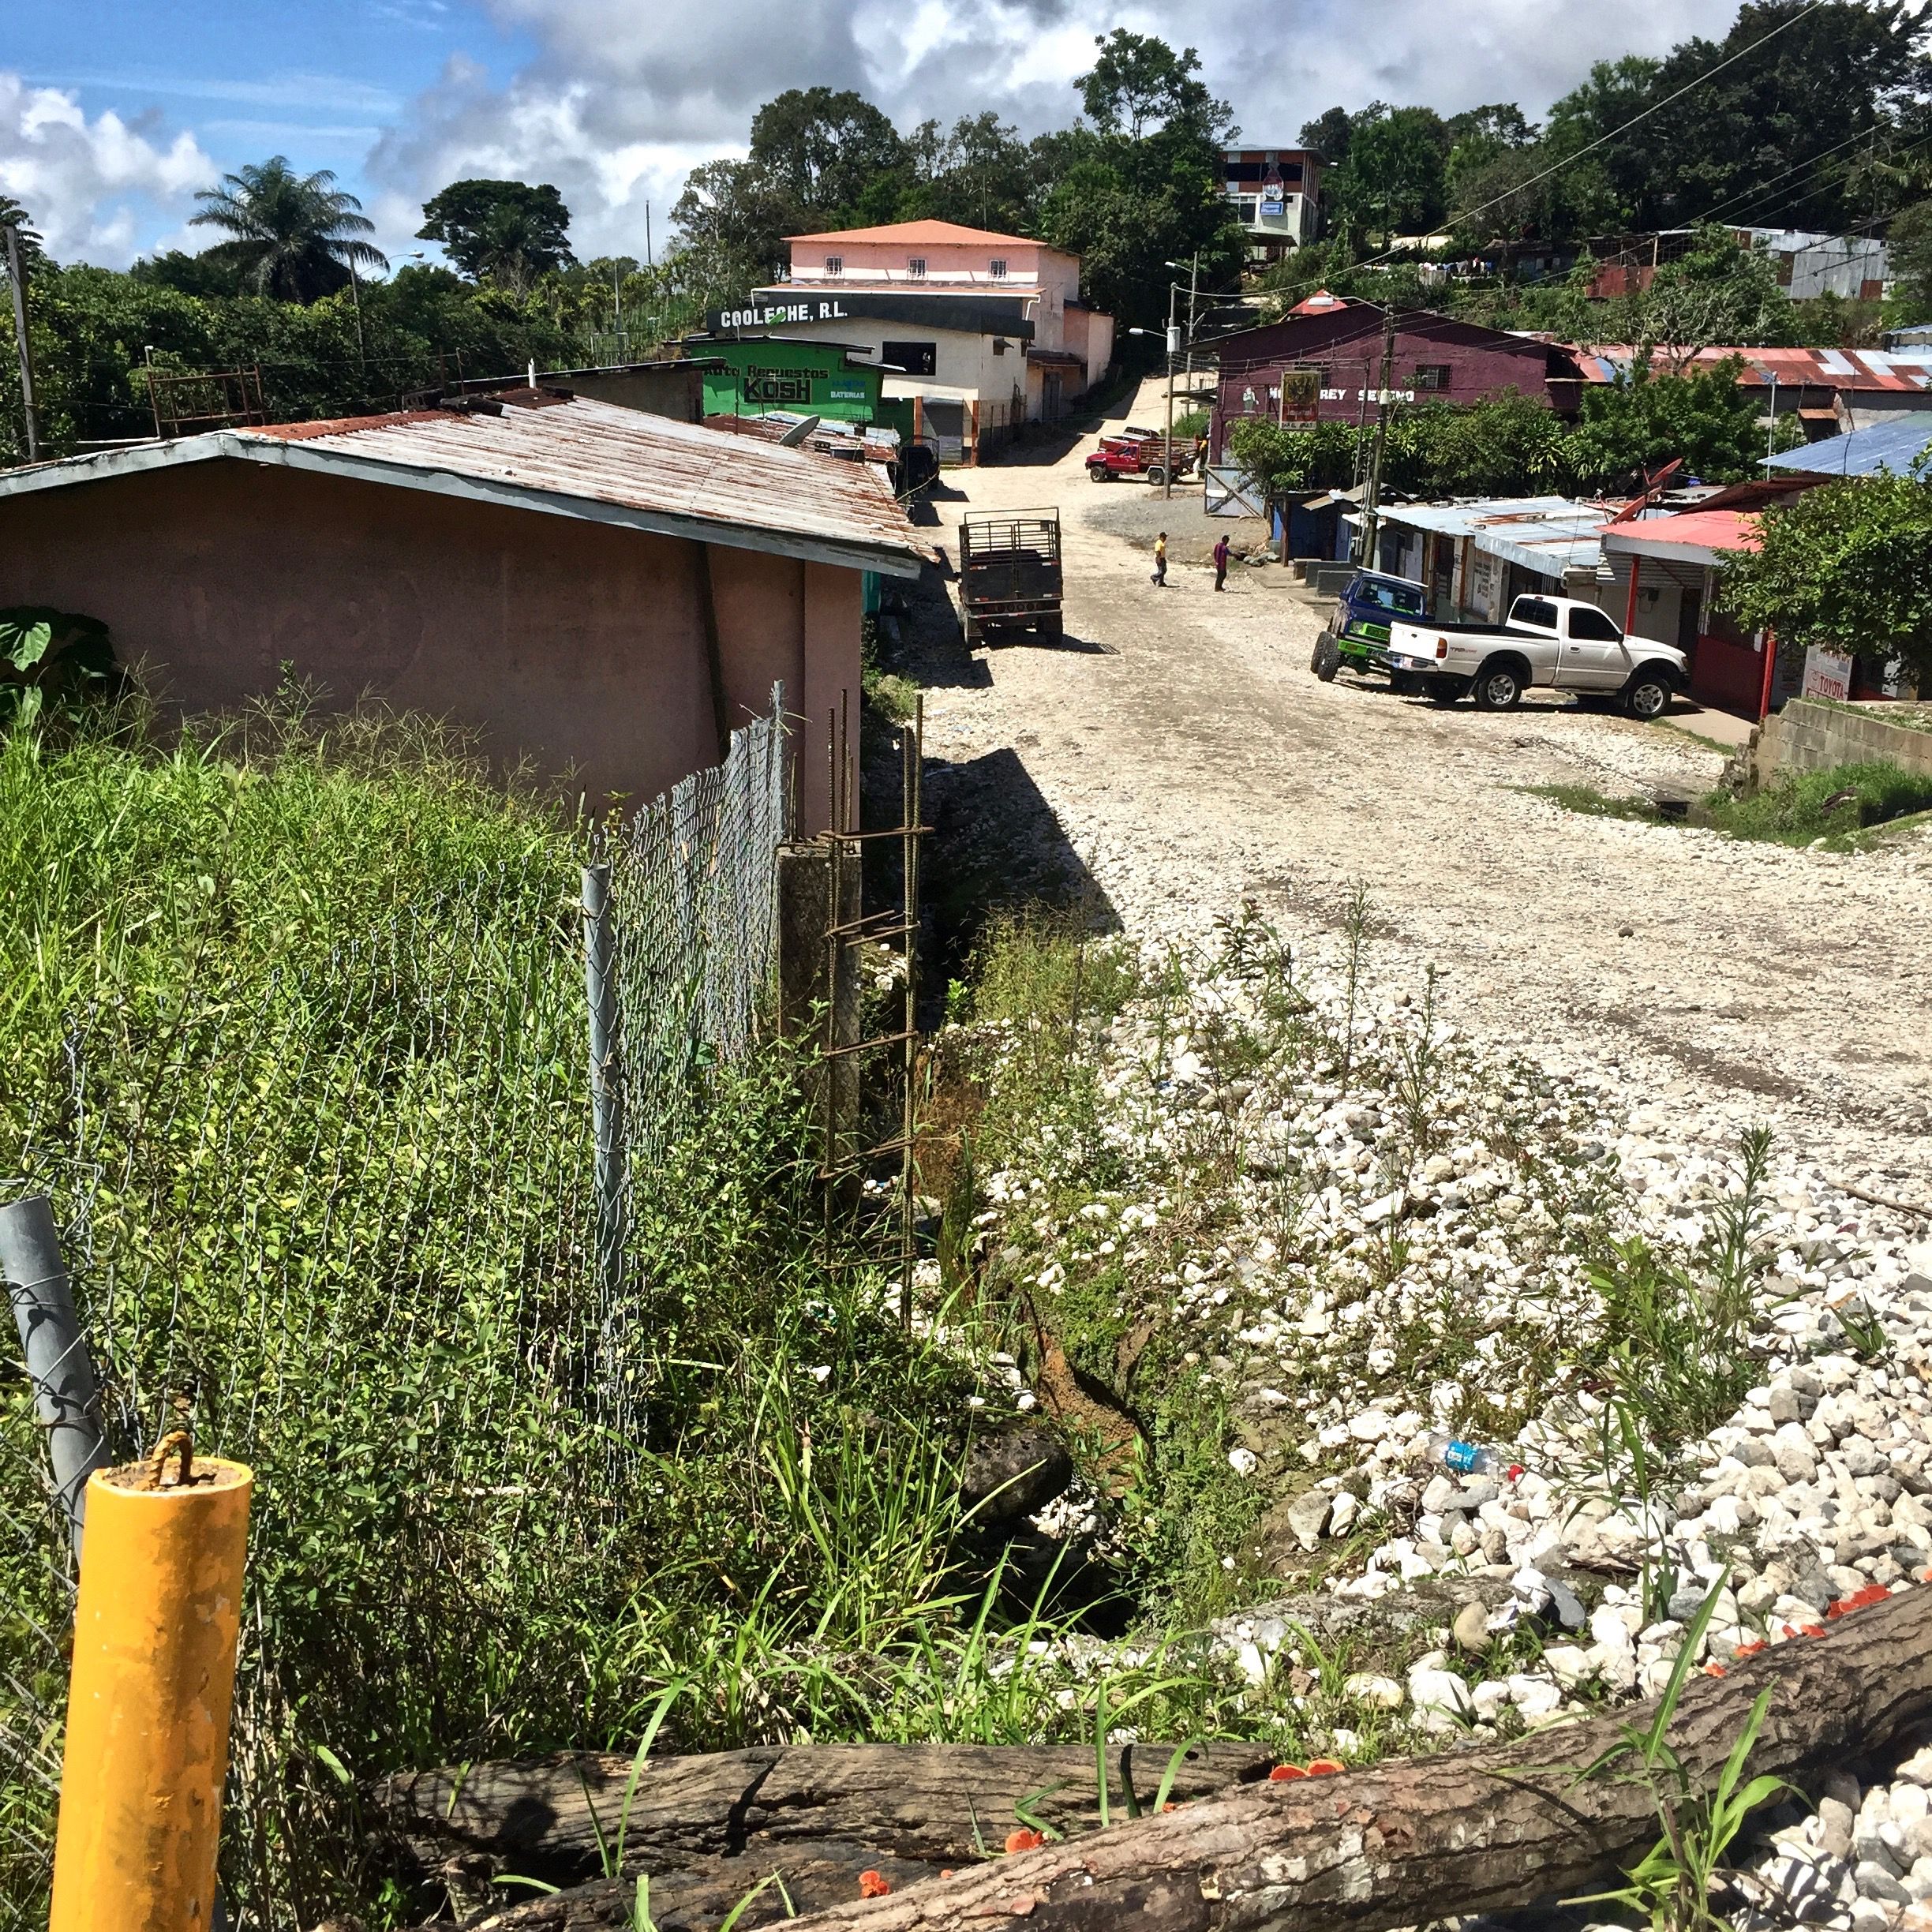 Rio Sereno/San Marcos border crossing is adjacent to open areas allowing for easy access to both countries. A gravel road separates Panama from Costa Rica. Image by Samira Tella. Costa Rica, 2018.